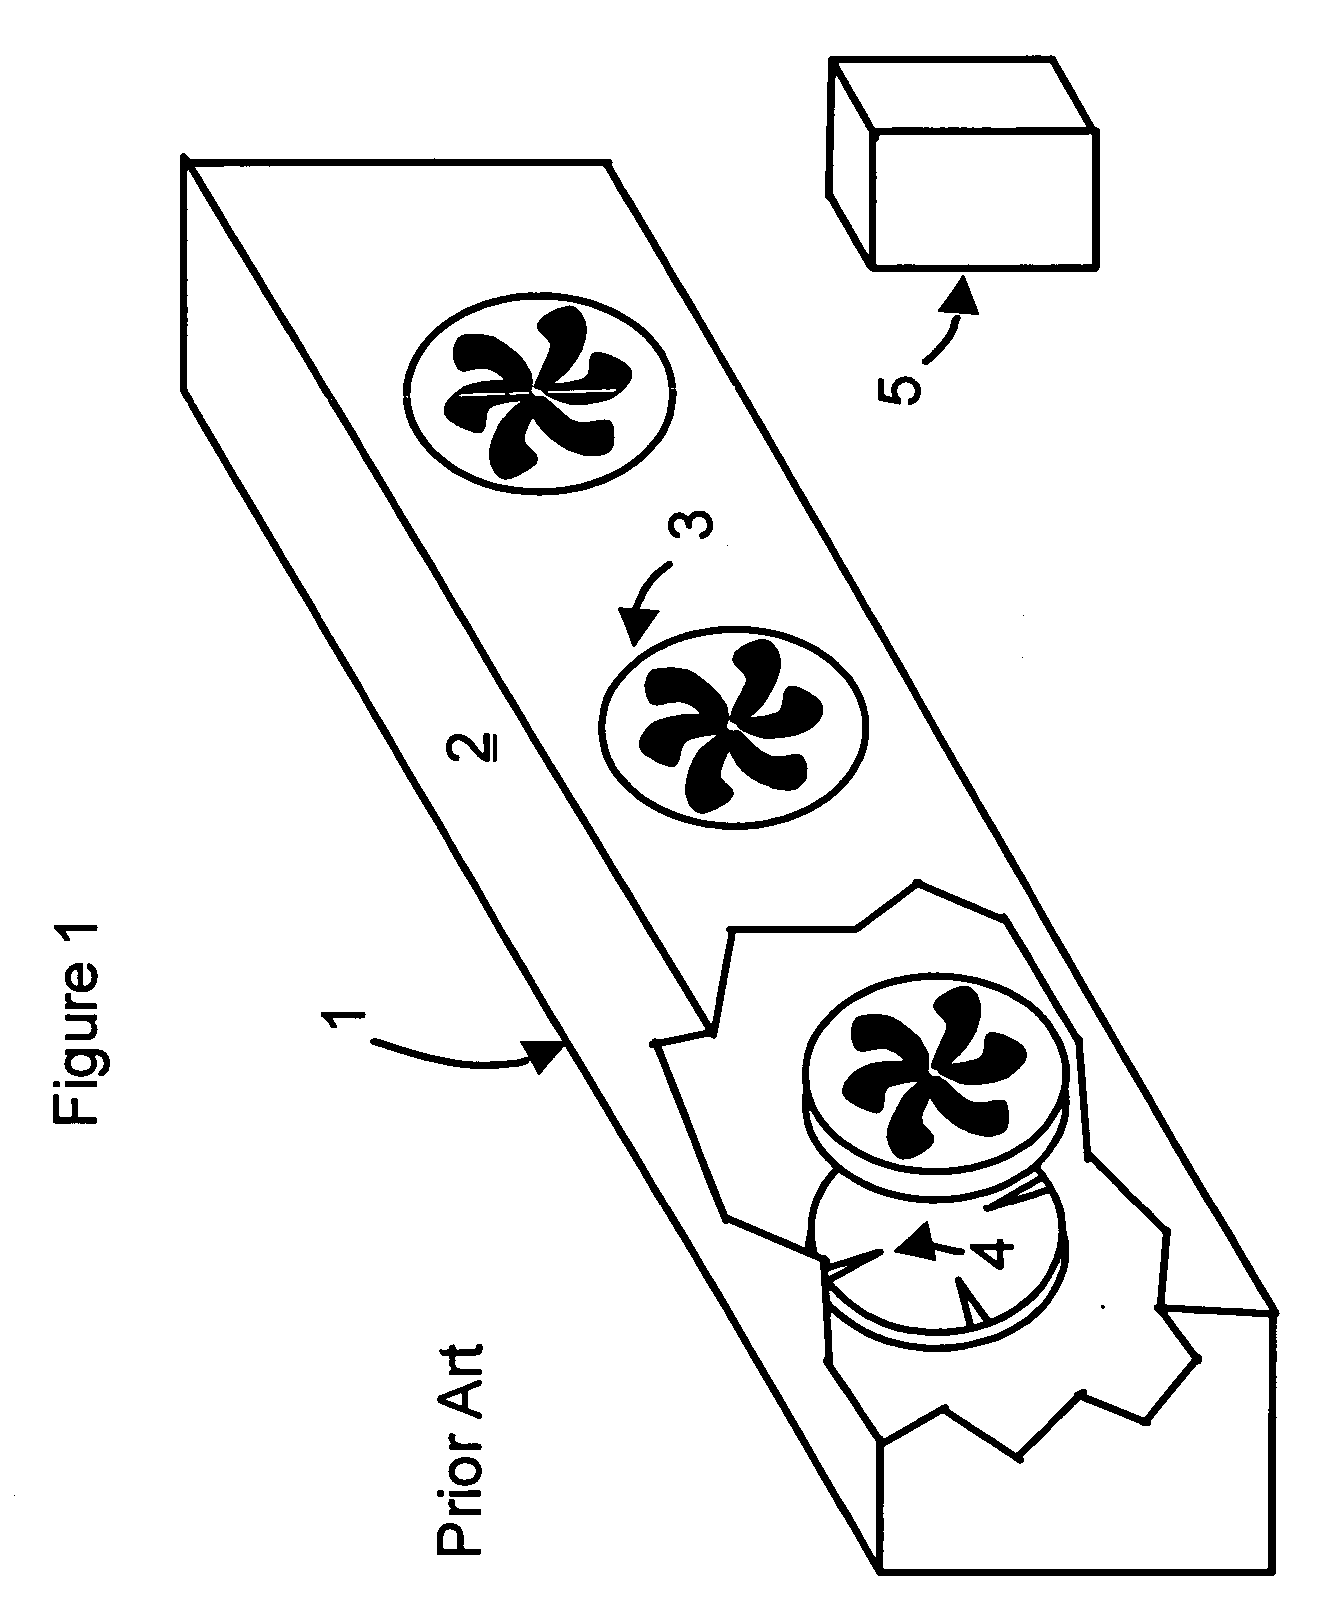 Collimated ionizers with fans